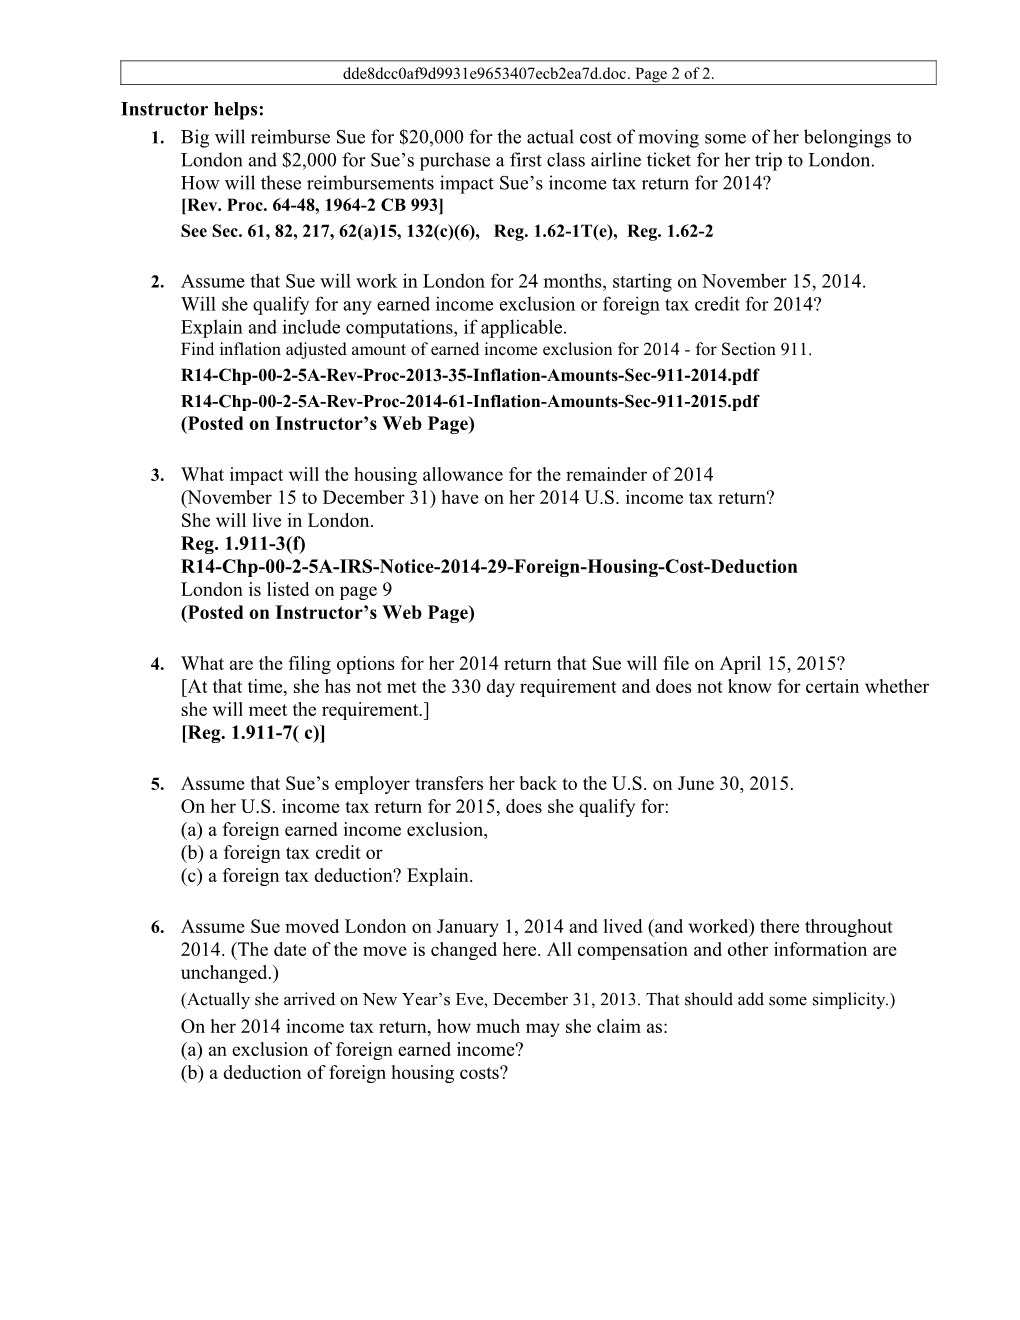 R14-Chp-00-2-5A-Memo on Sec 911 Etc-Final. Page 1 of 2